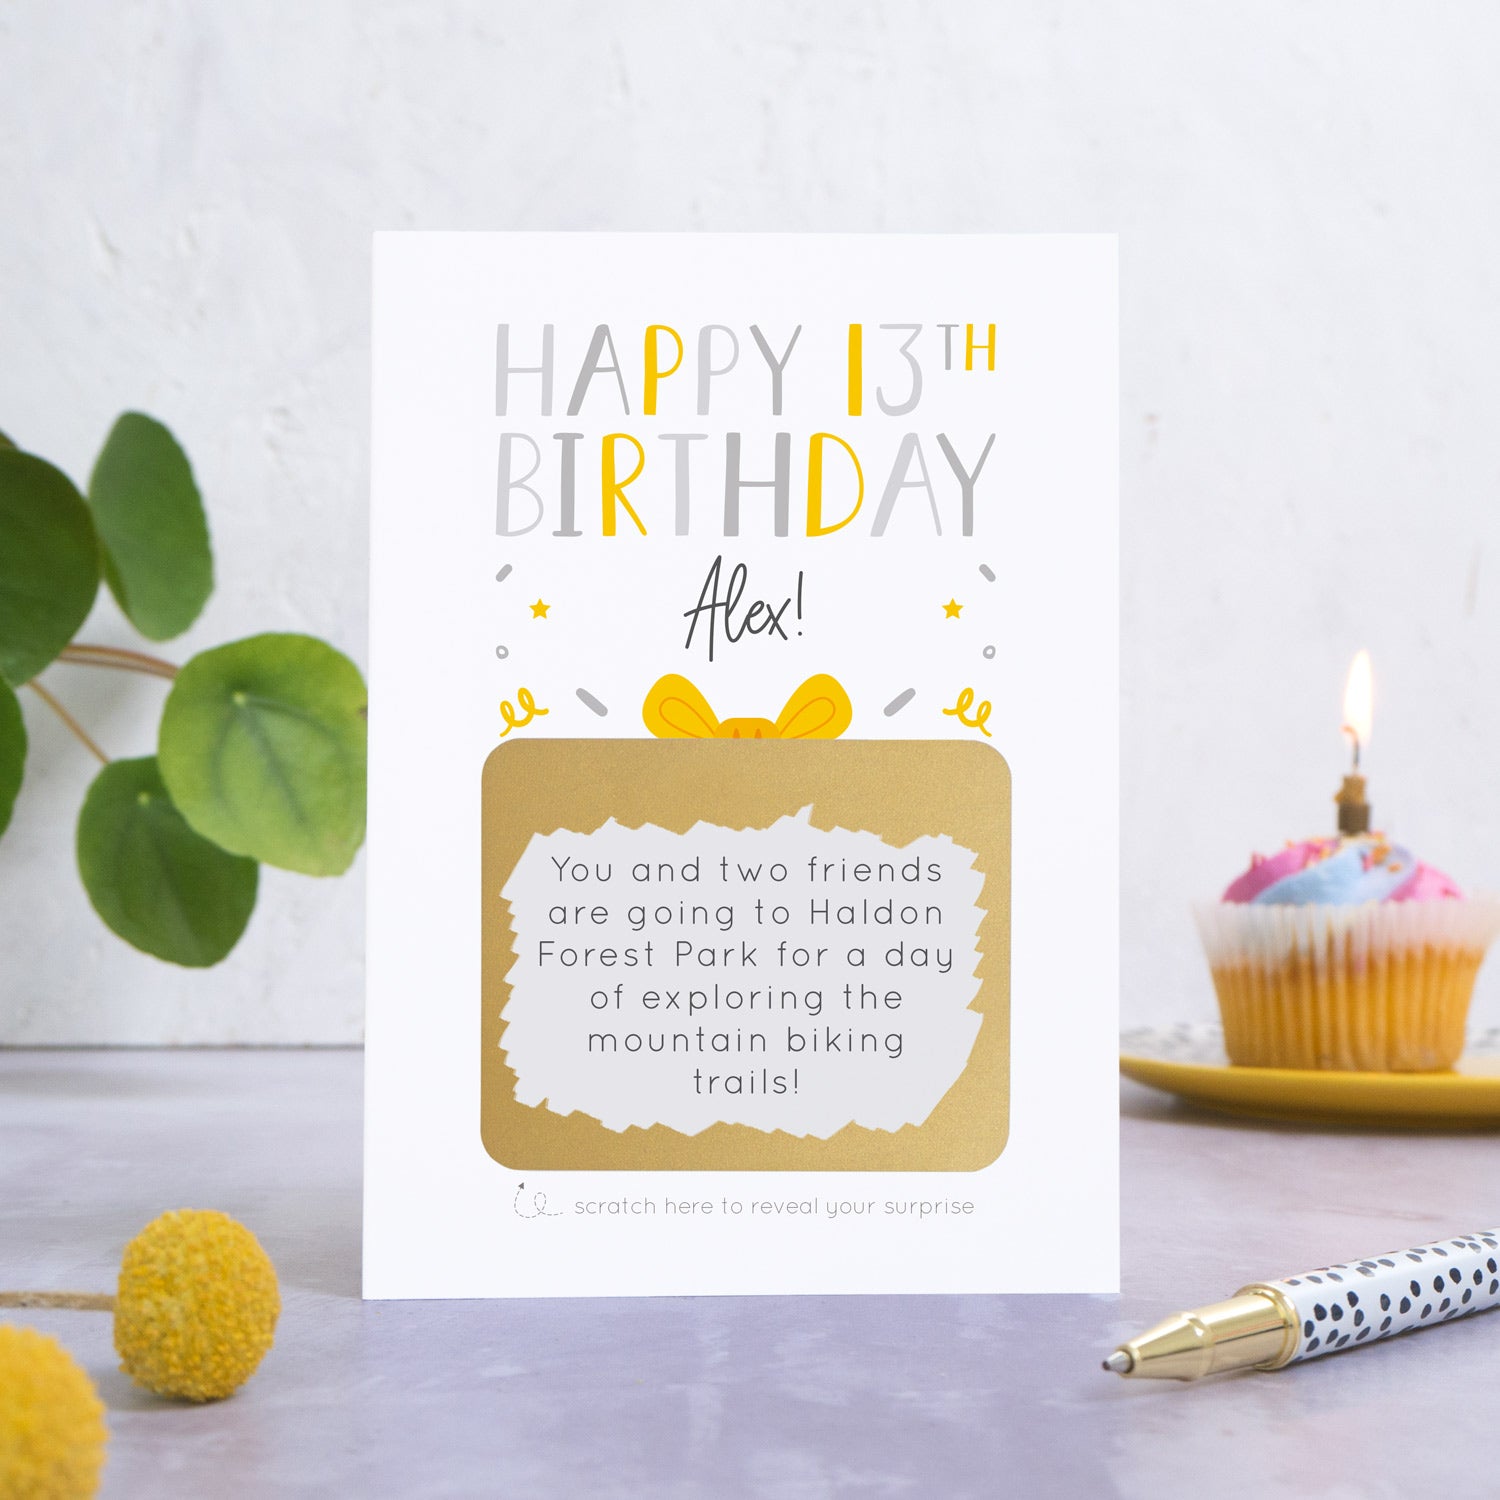 A personalised happy 13th birthday scratch card in grey that has been photographed on a white and grey background. There is foliage and yellow flowers on the left and a cupcake and a pen to the right. The card features the recipients name and a scratch panel that has been scratched off revealing a personalised message.